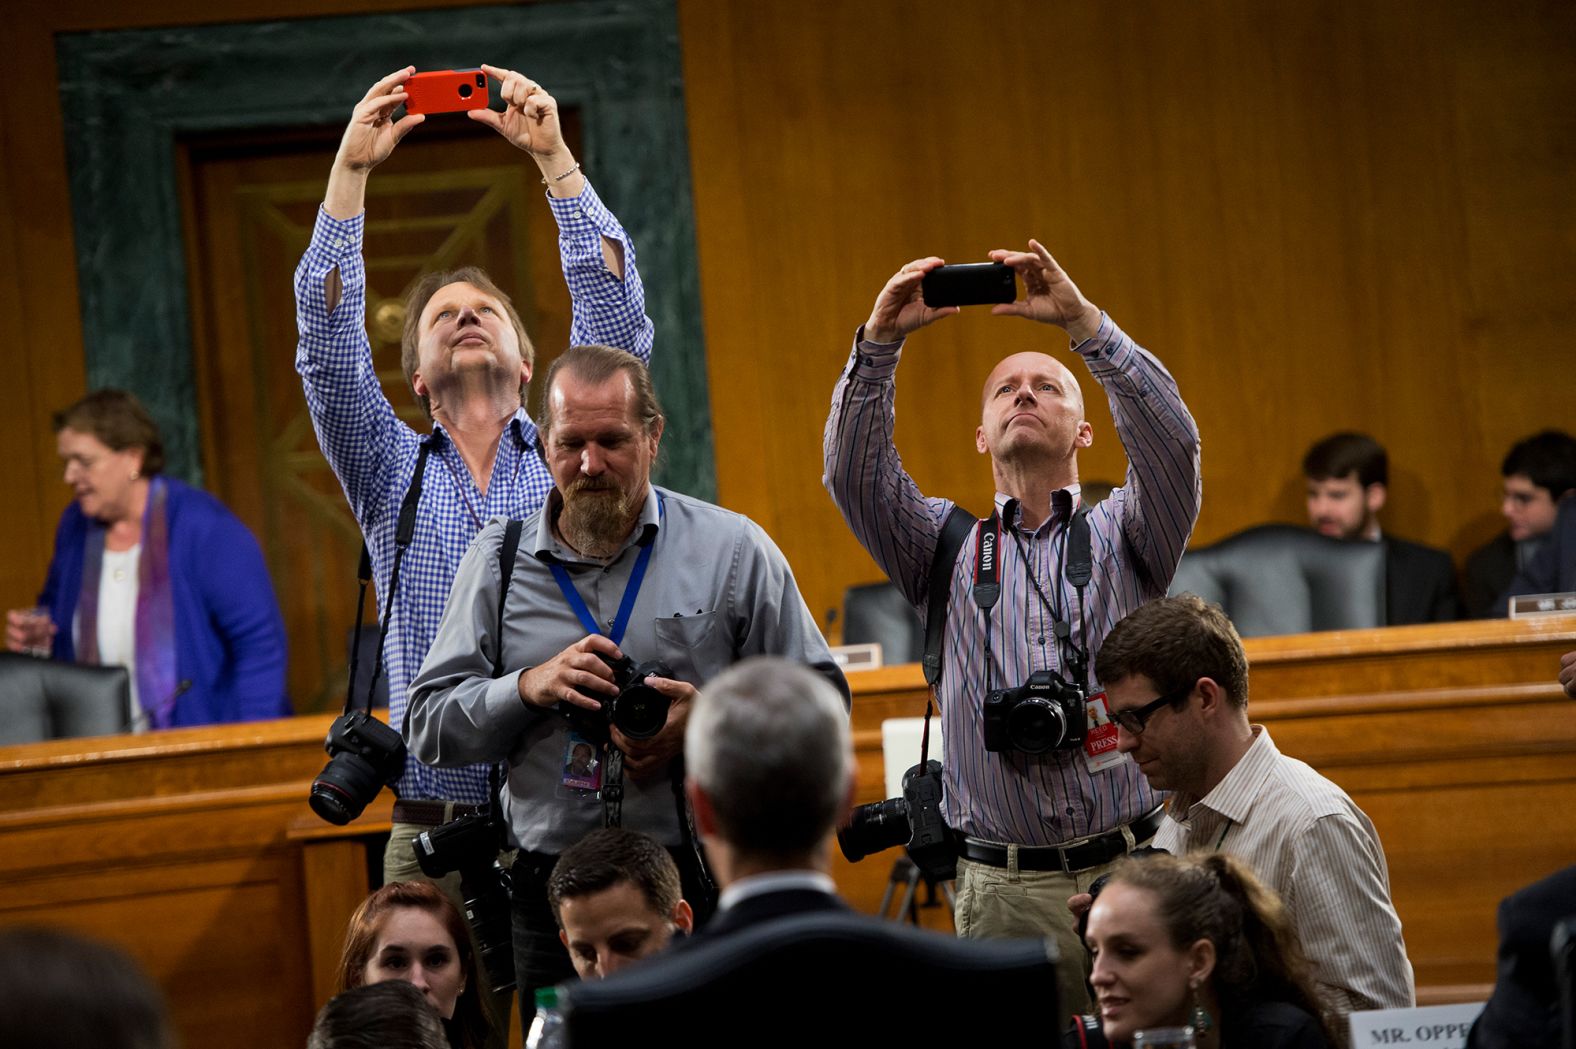 Photographers use iPhones to take photos of Cook during a break in a Senate hearing held by the Homeland Security and Governmental Affairs Subcommittee on Investigations in 2013. Cook and other Apple officials were on hand to explain the company's filings after the subcommittee accused Apple of tax avoidance.